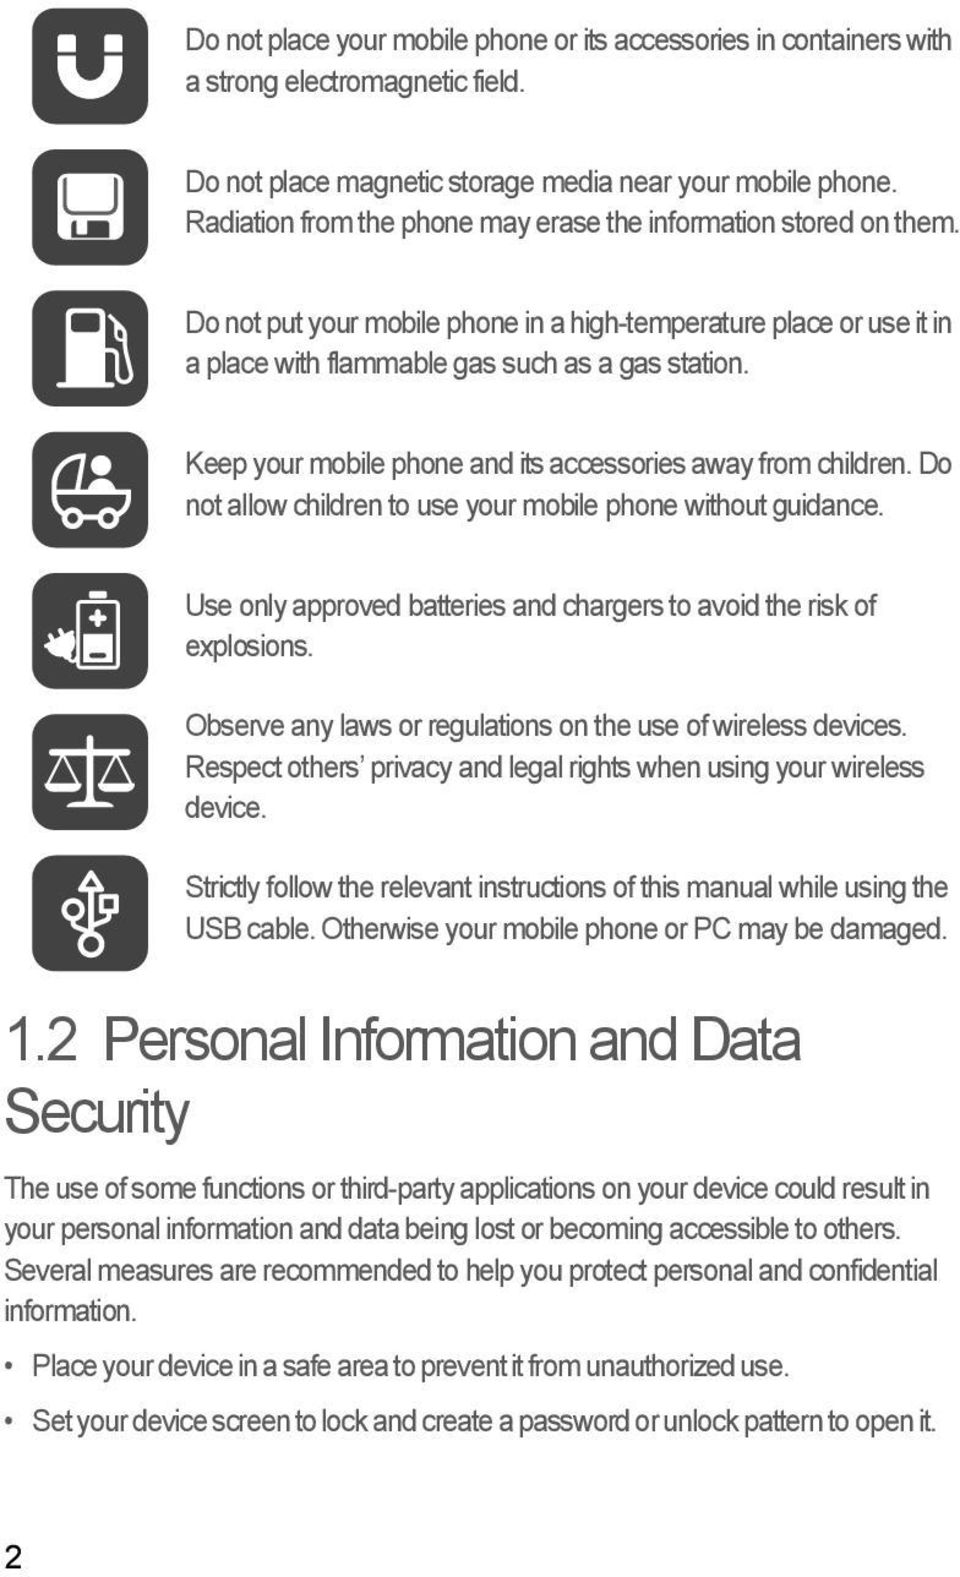 Keep your mobile phone and its accessories away from children. Do not allow children to use your mobile phone without guidance.